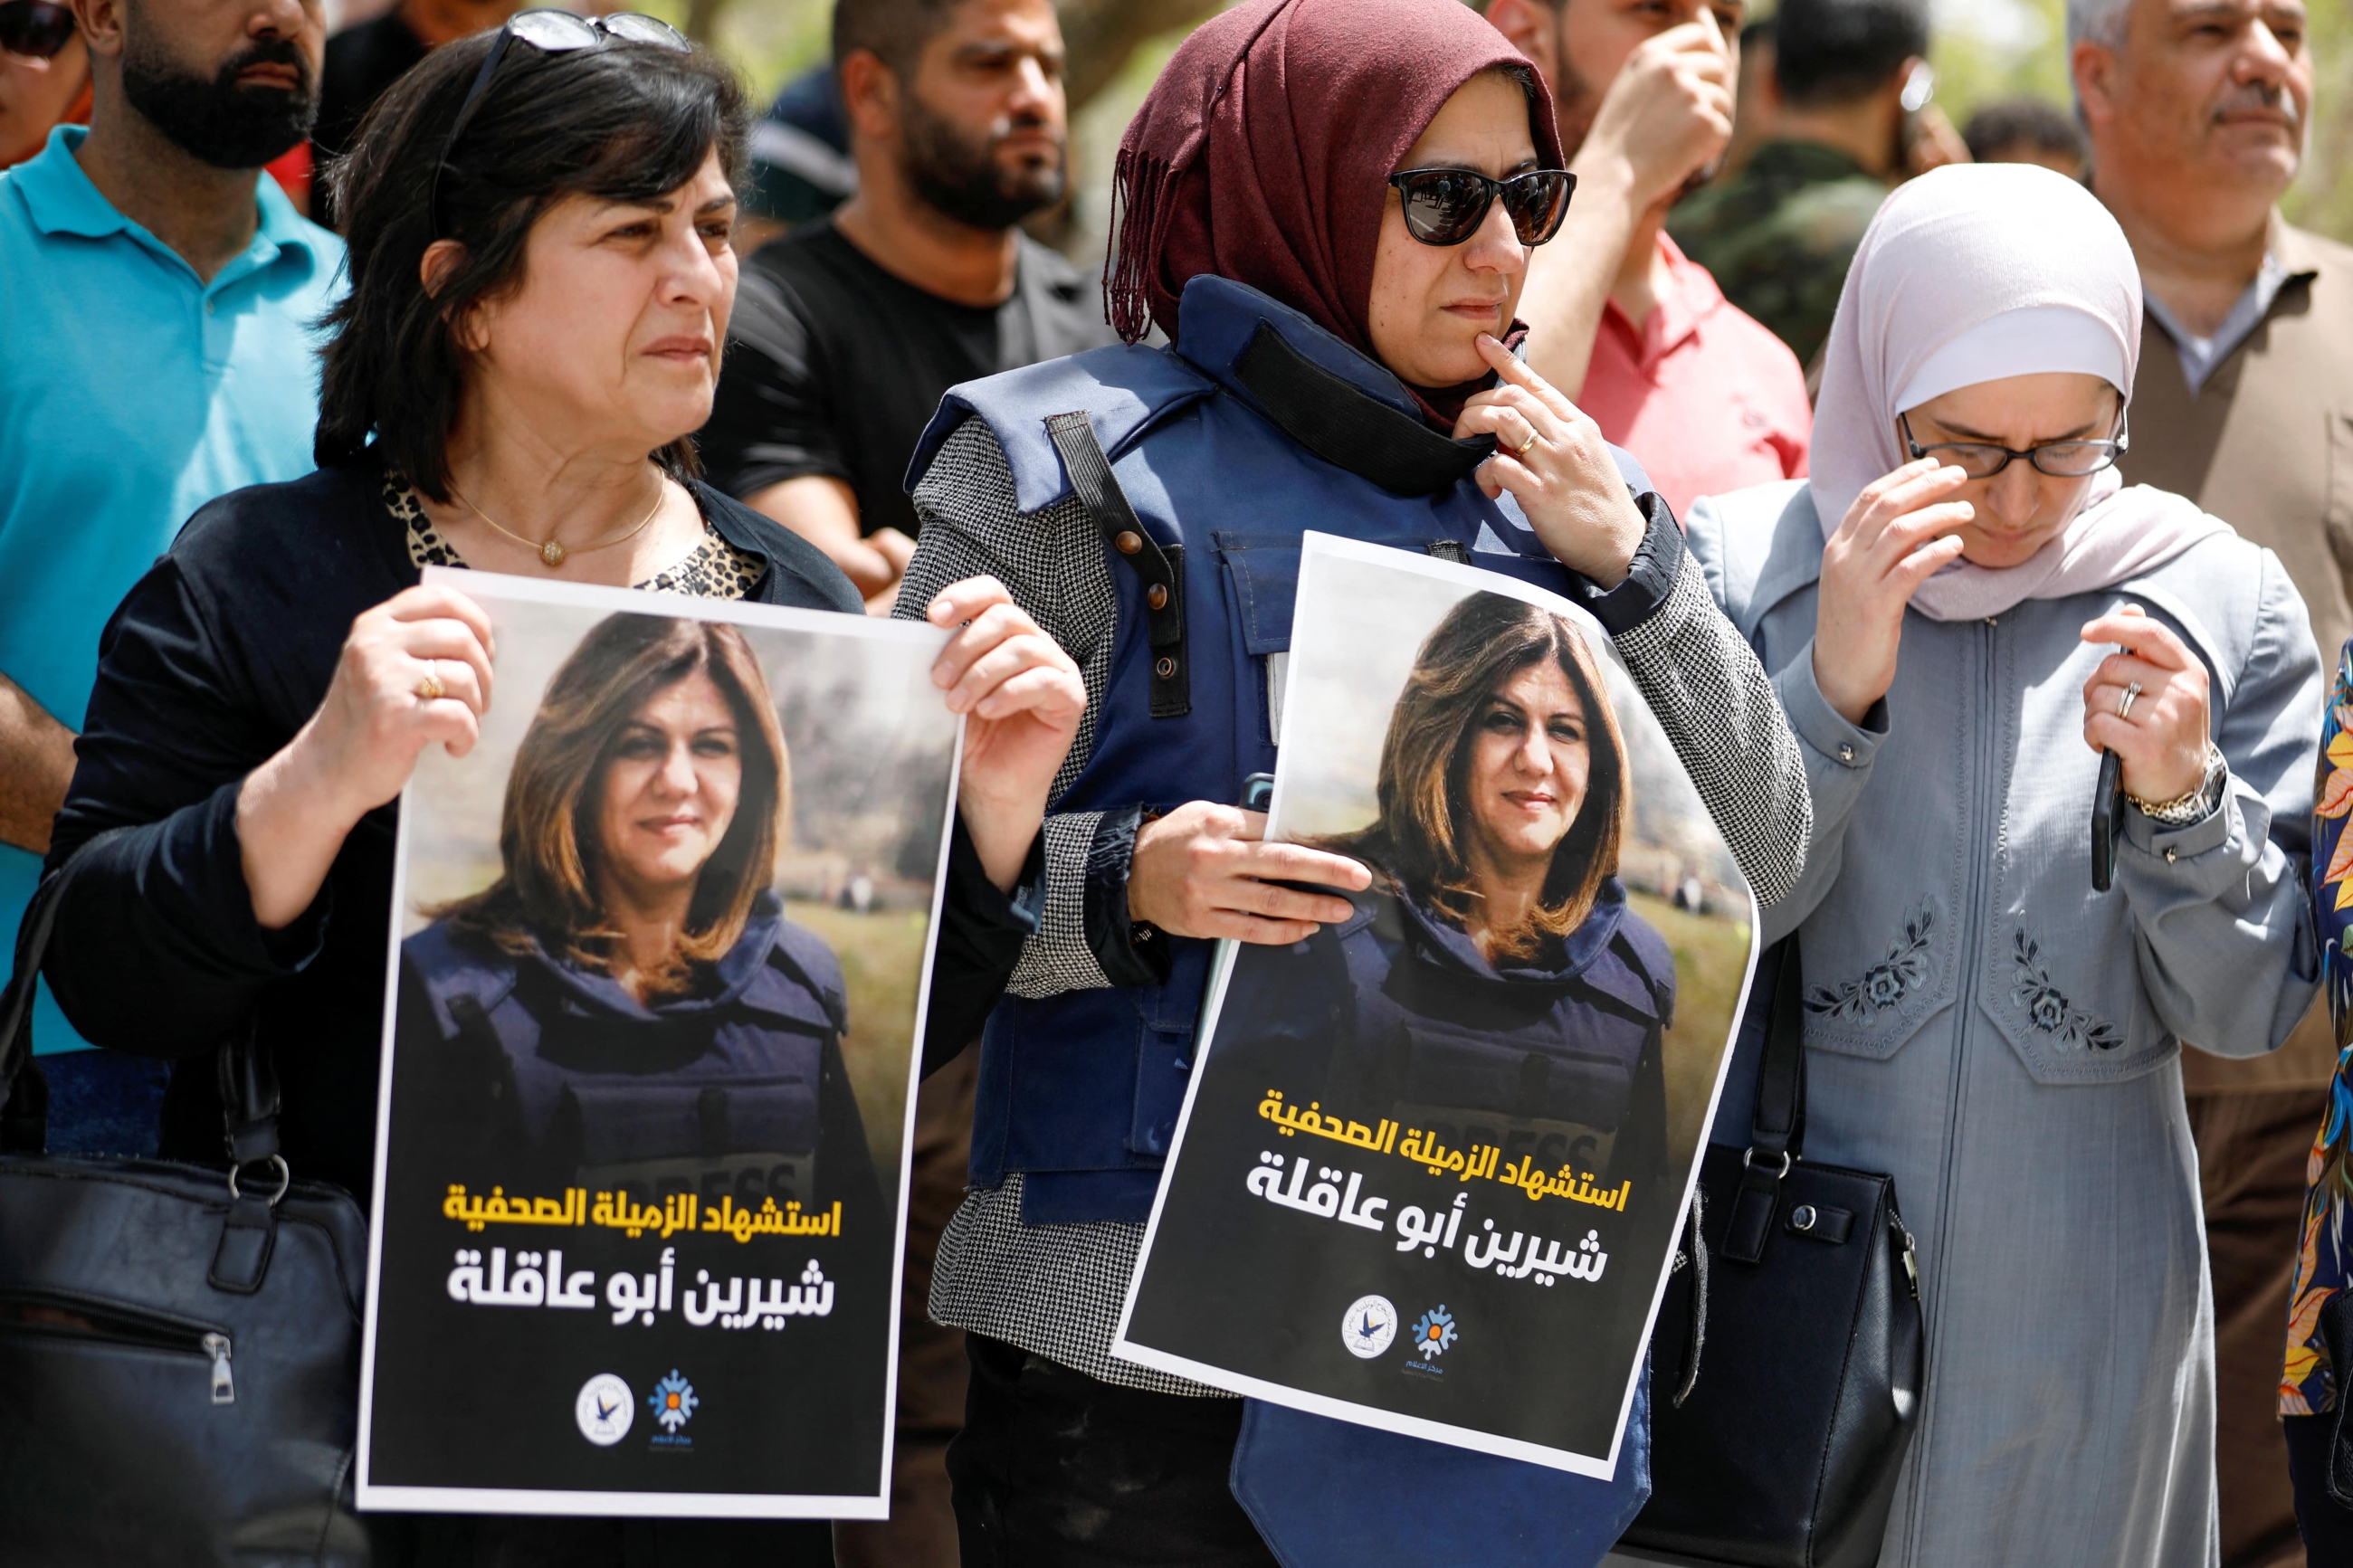 Palestinians hold pictures of Al Jazeera reporter Shireen Abu Akleh, who was killed by Israeli army gunfire during an Israeli raid, according to the Qatar-based news channel, in Nablus in the Israeli-occupied West Bank 11 May 2022 (Reuters)